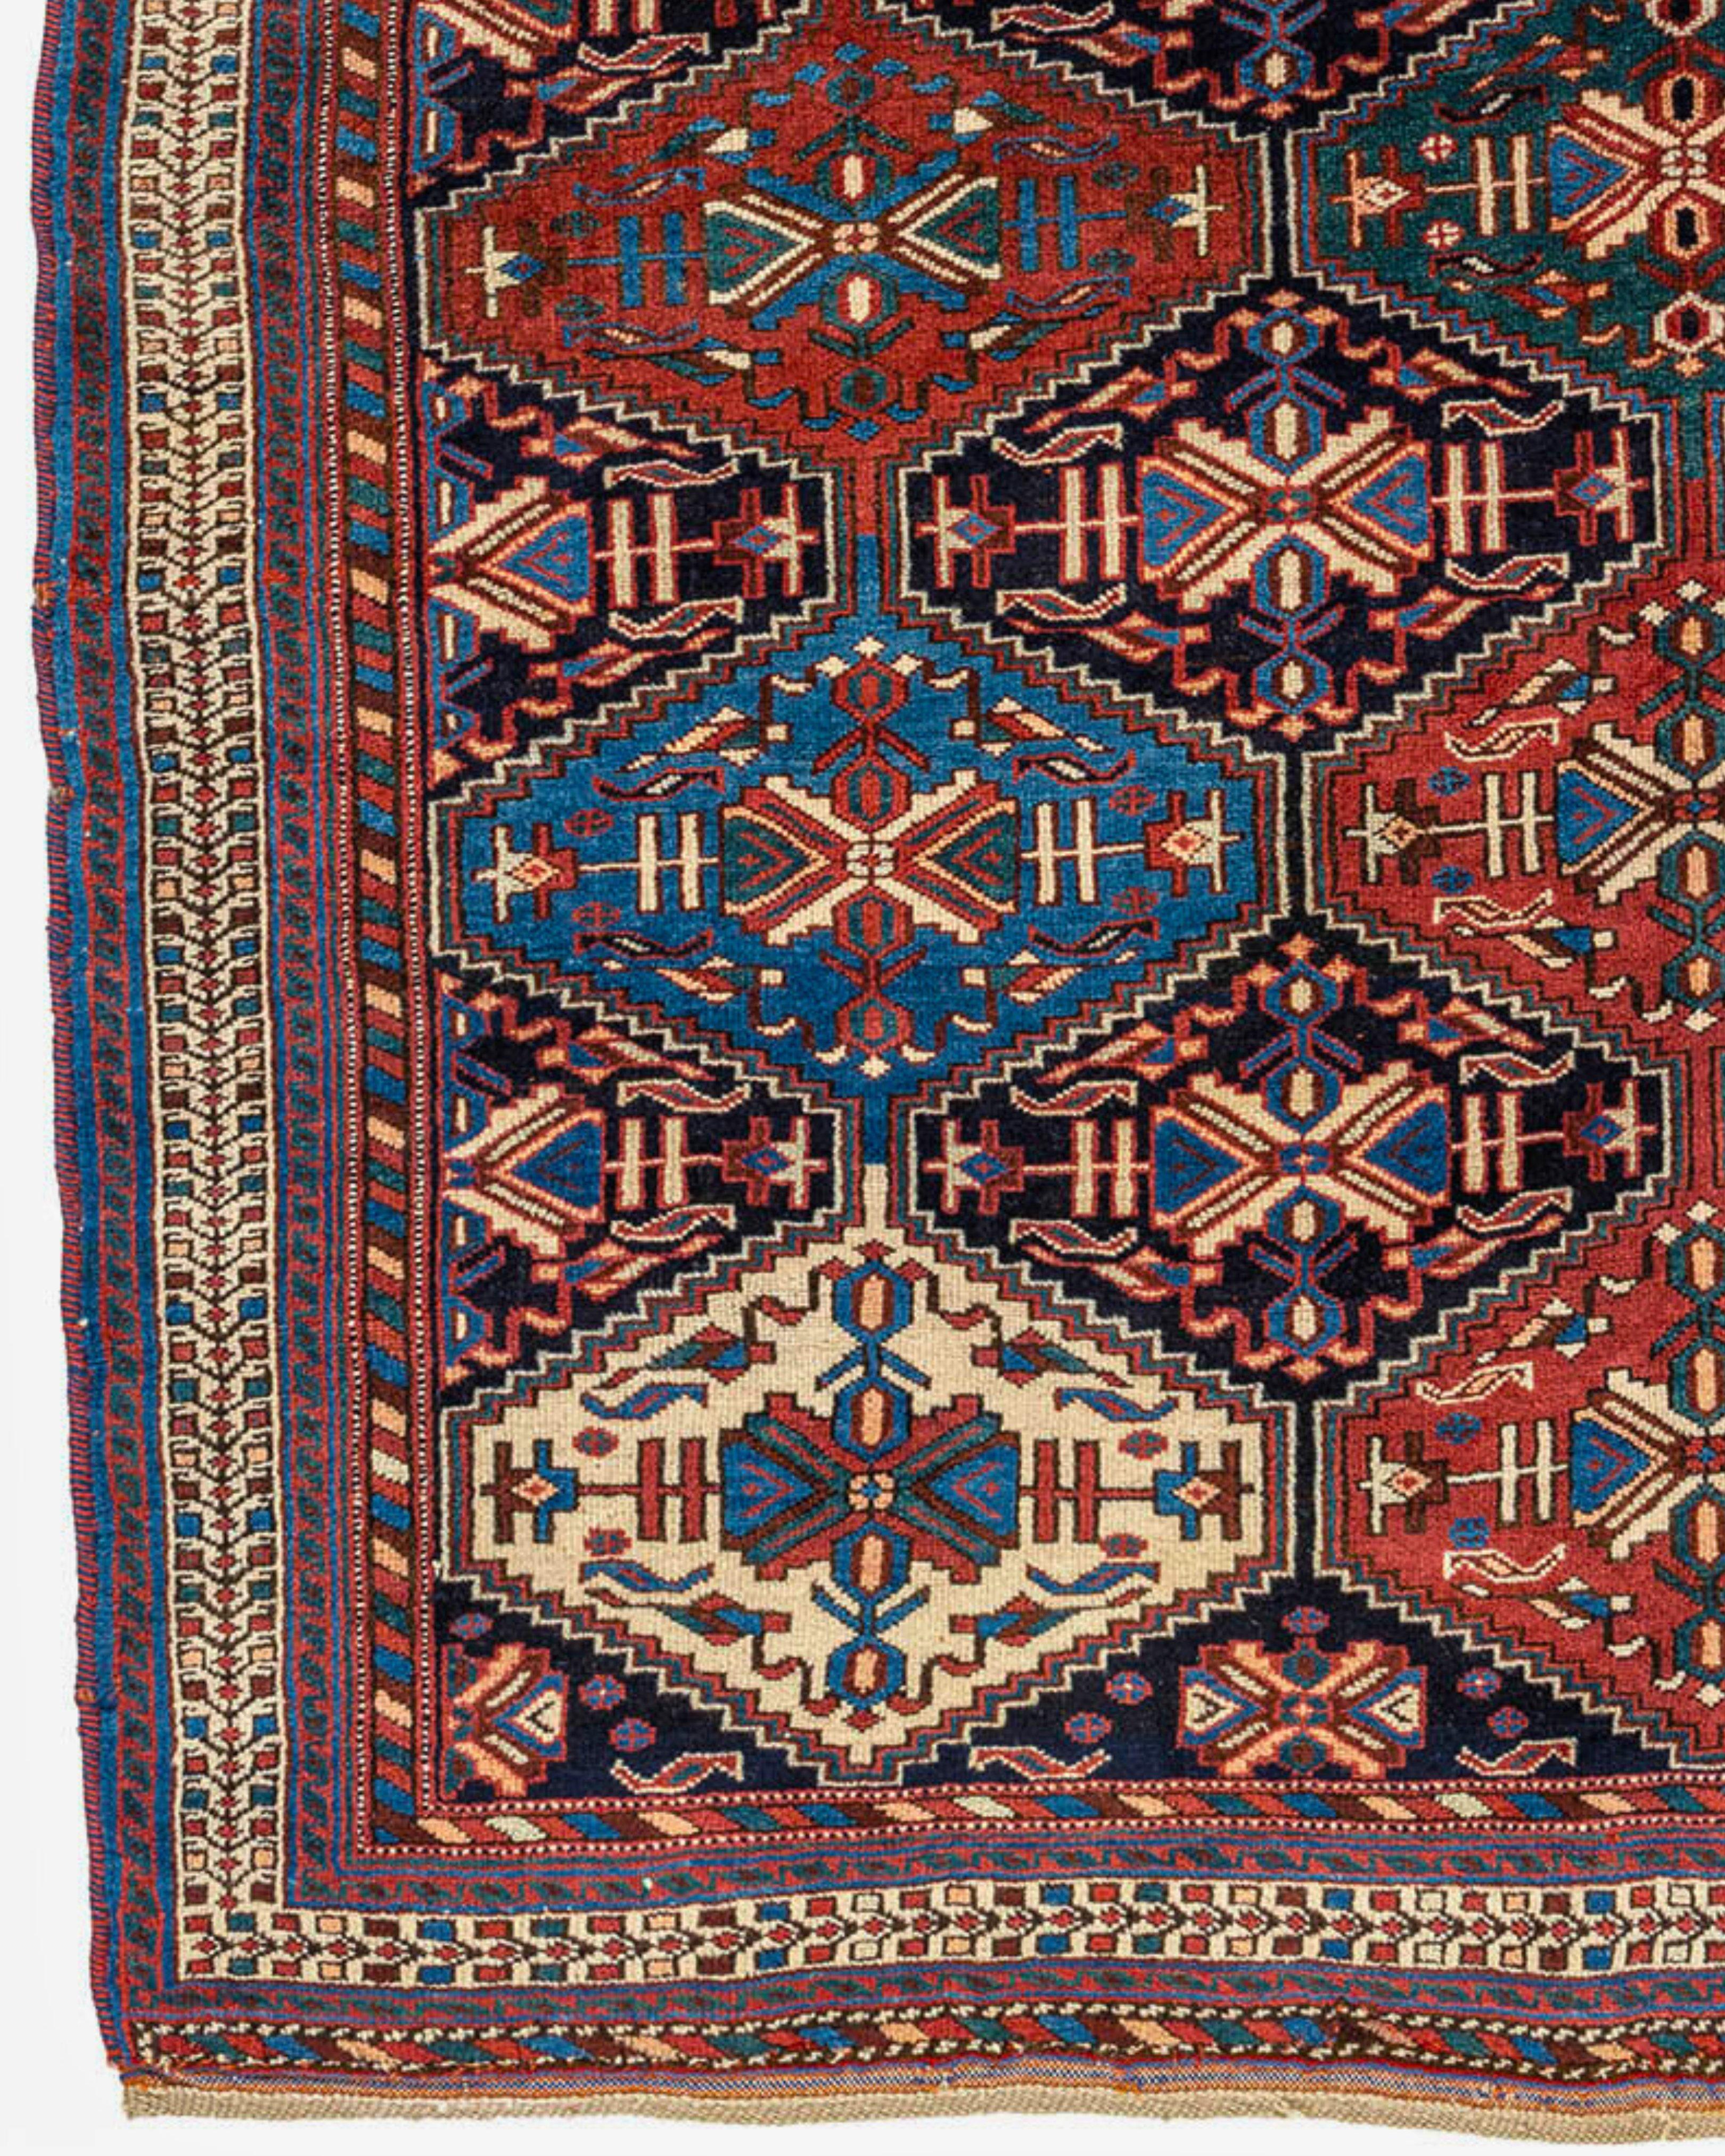 Southwest Persian Afshar Rug, 20th Century (2nd Quarter) In Excellent Condition For Sale In San Francisco, CA